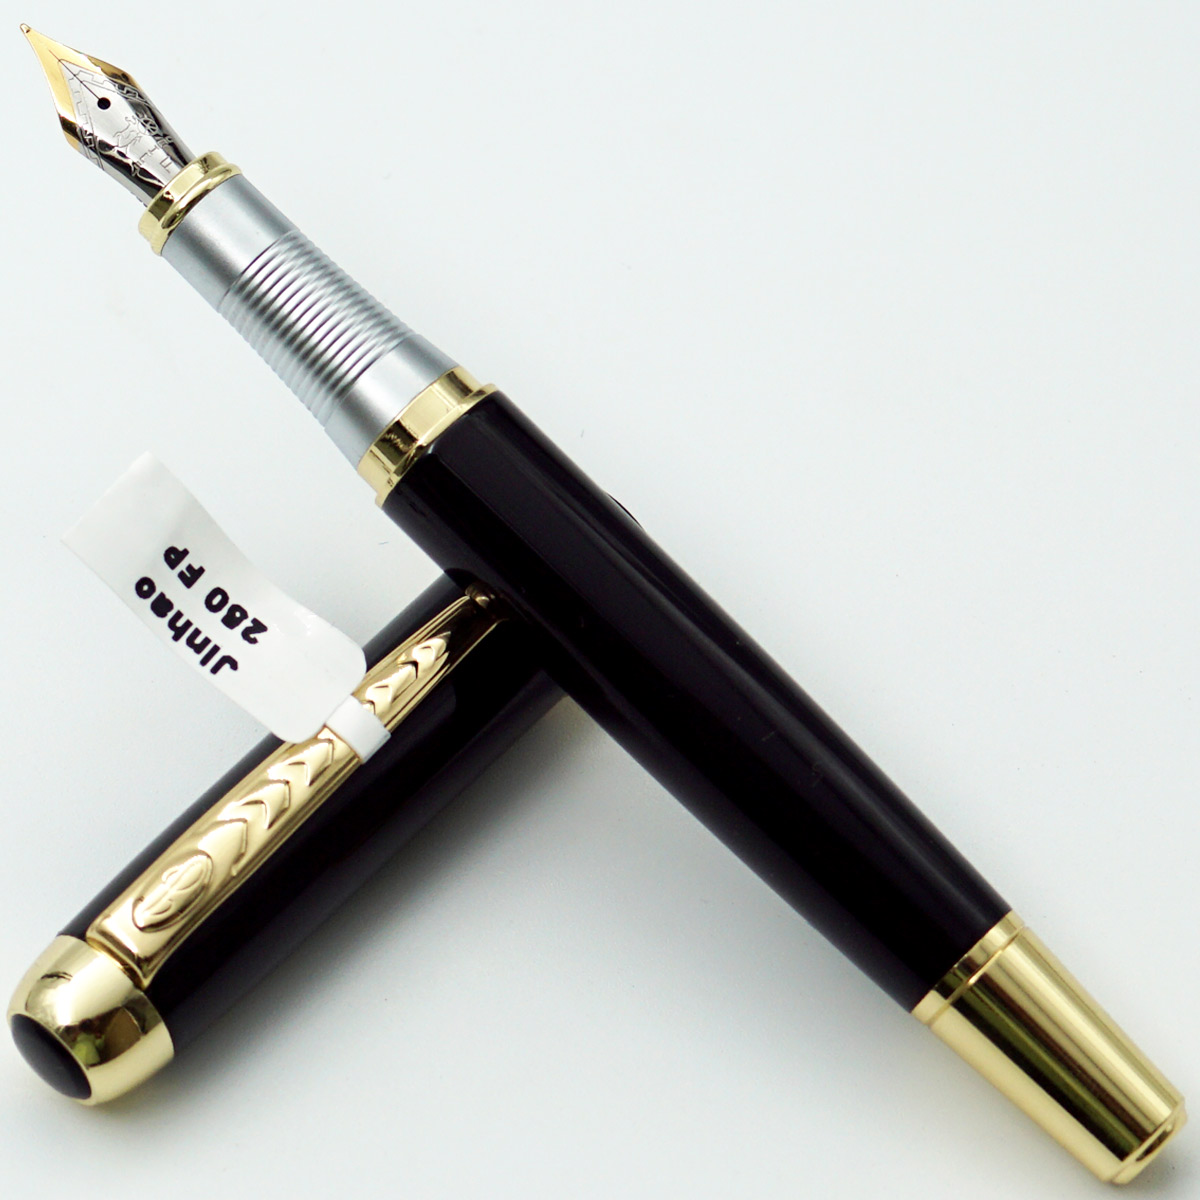 Jinhao 250 Glossy Black Color Body With 5.5 Fine Nib With Golden Designed Clip Converter Type Fountain Pen SKU 24527